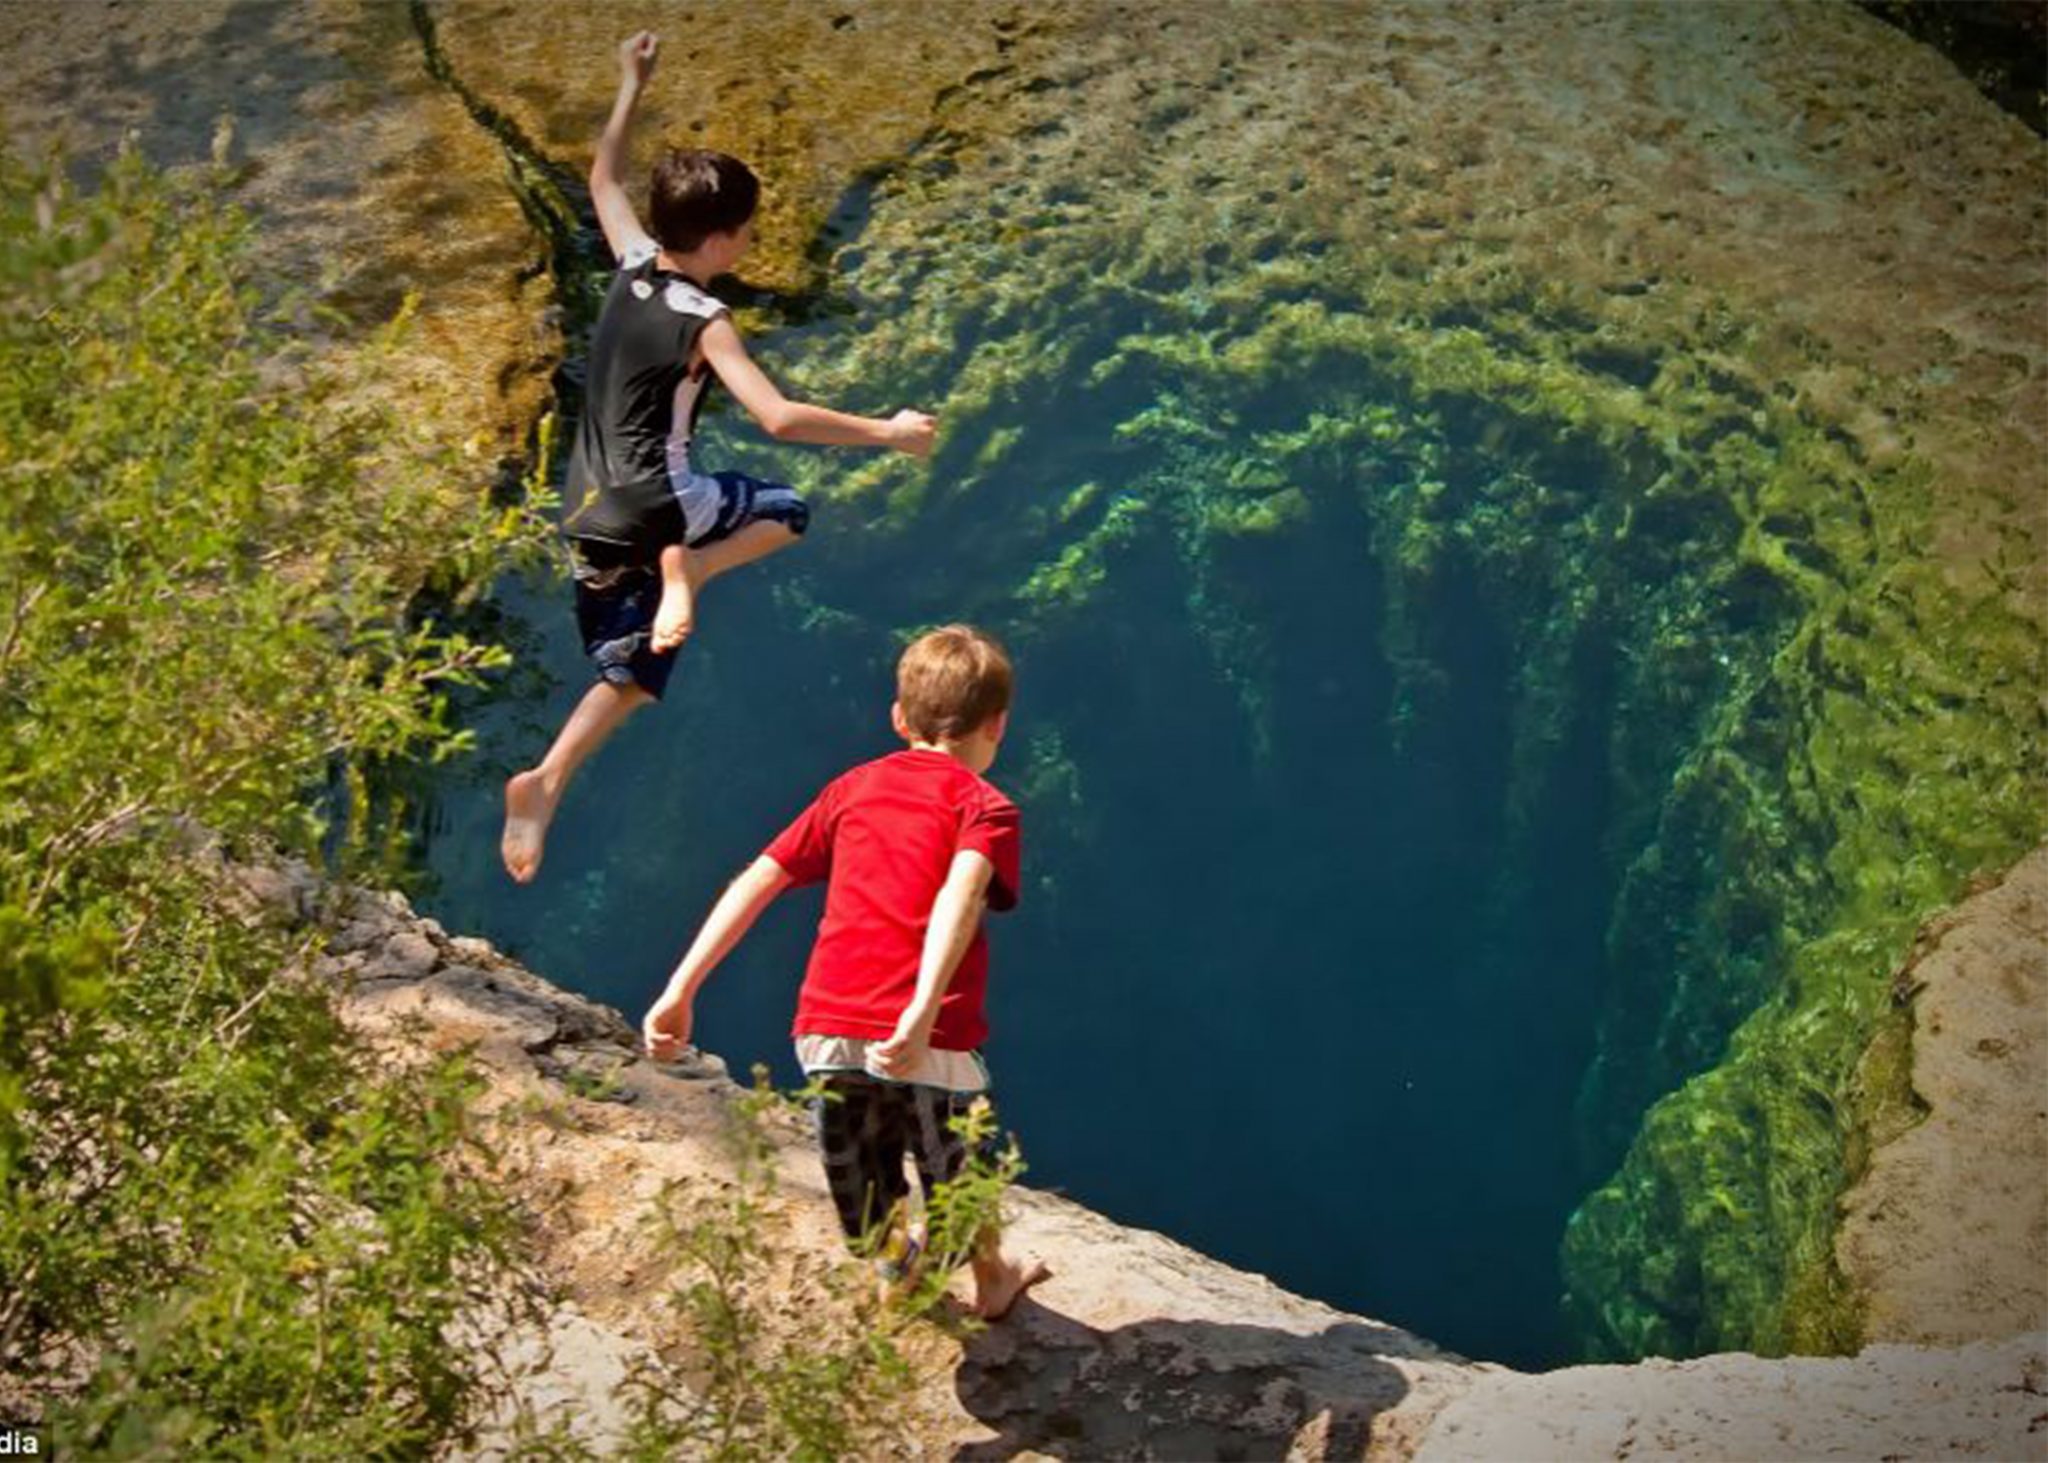 Kids jumping into a watering hole